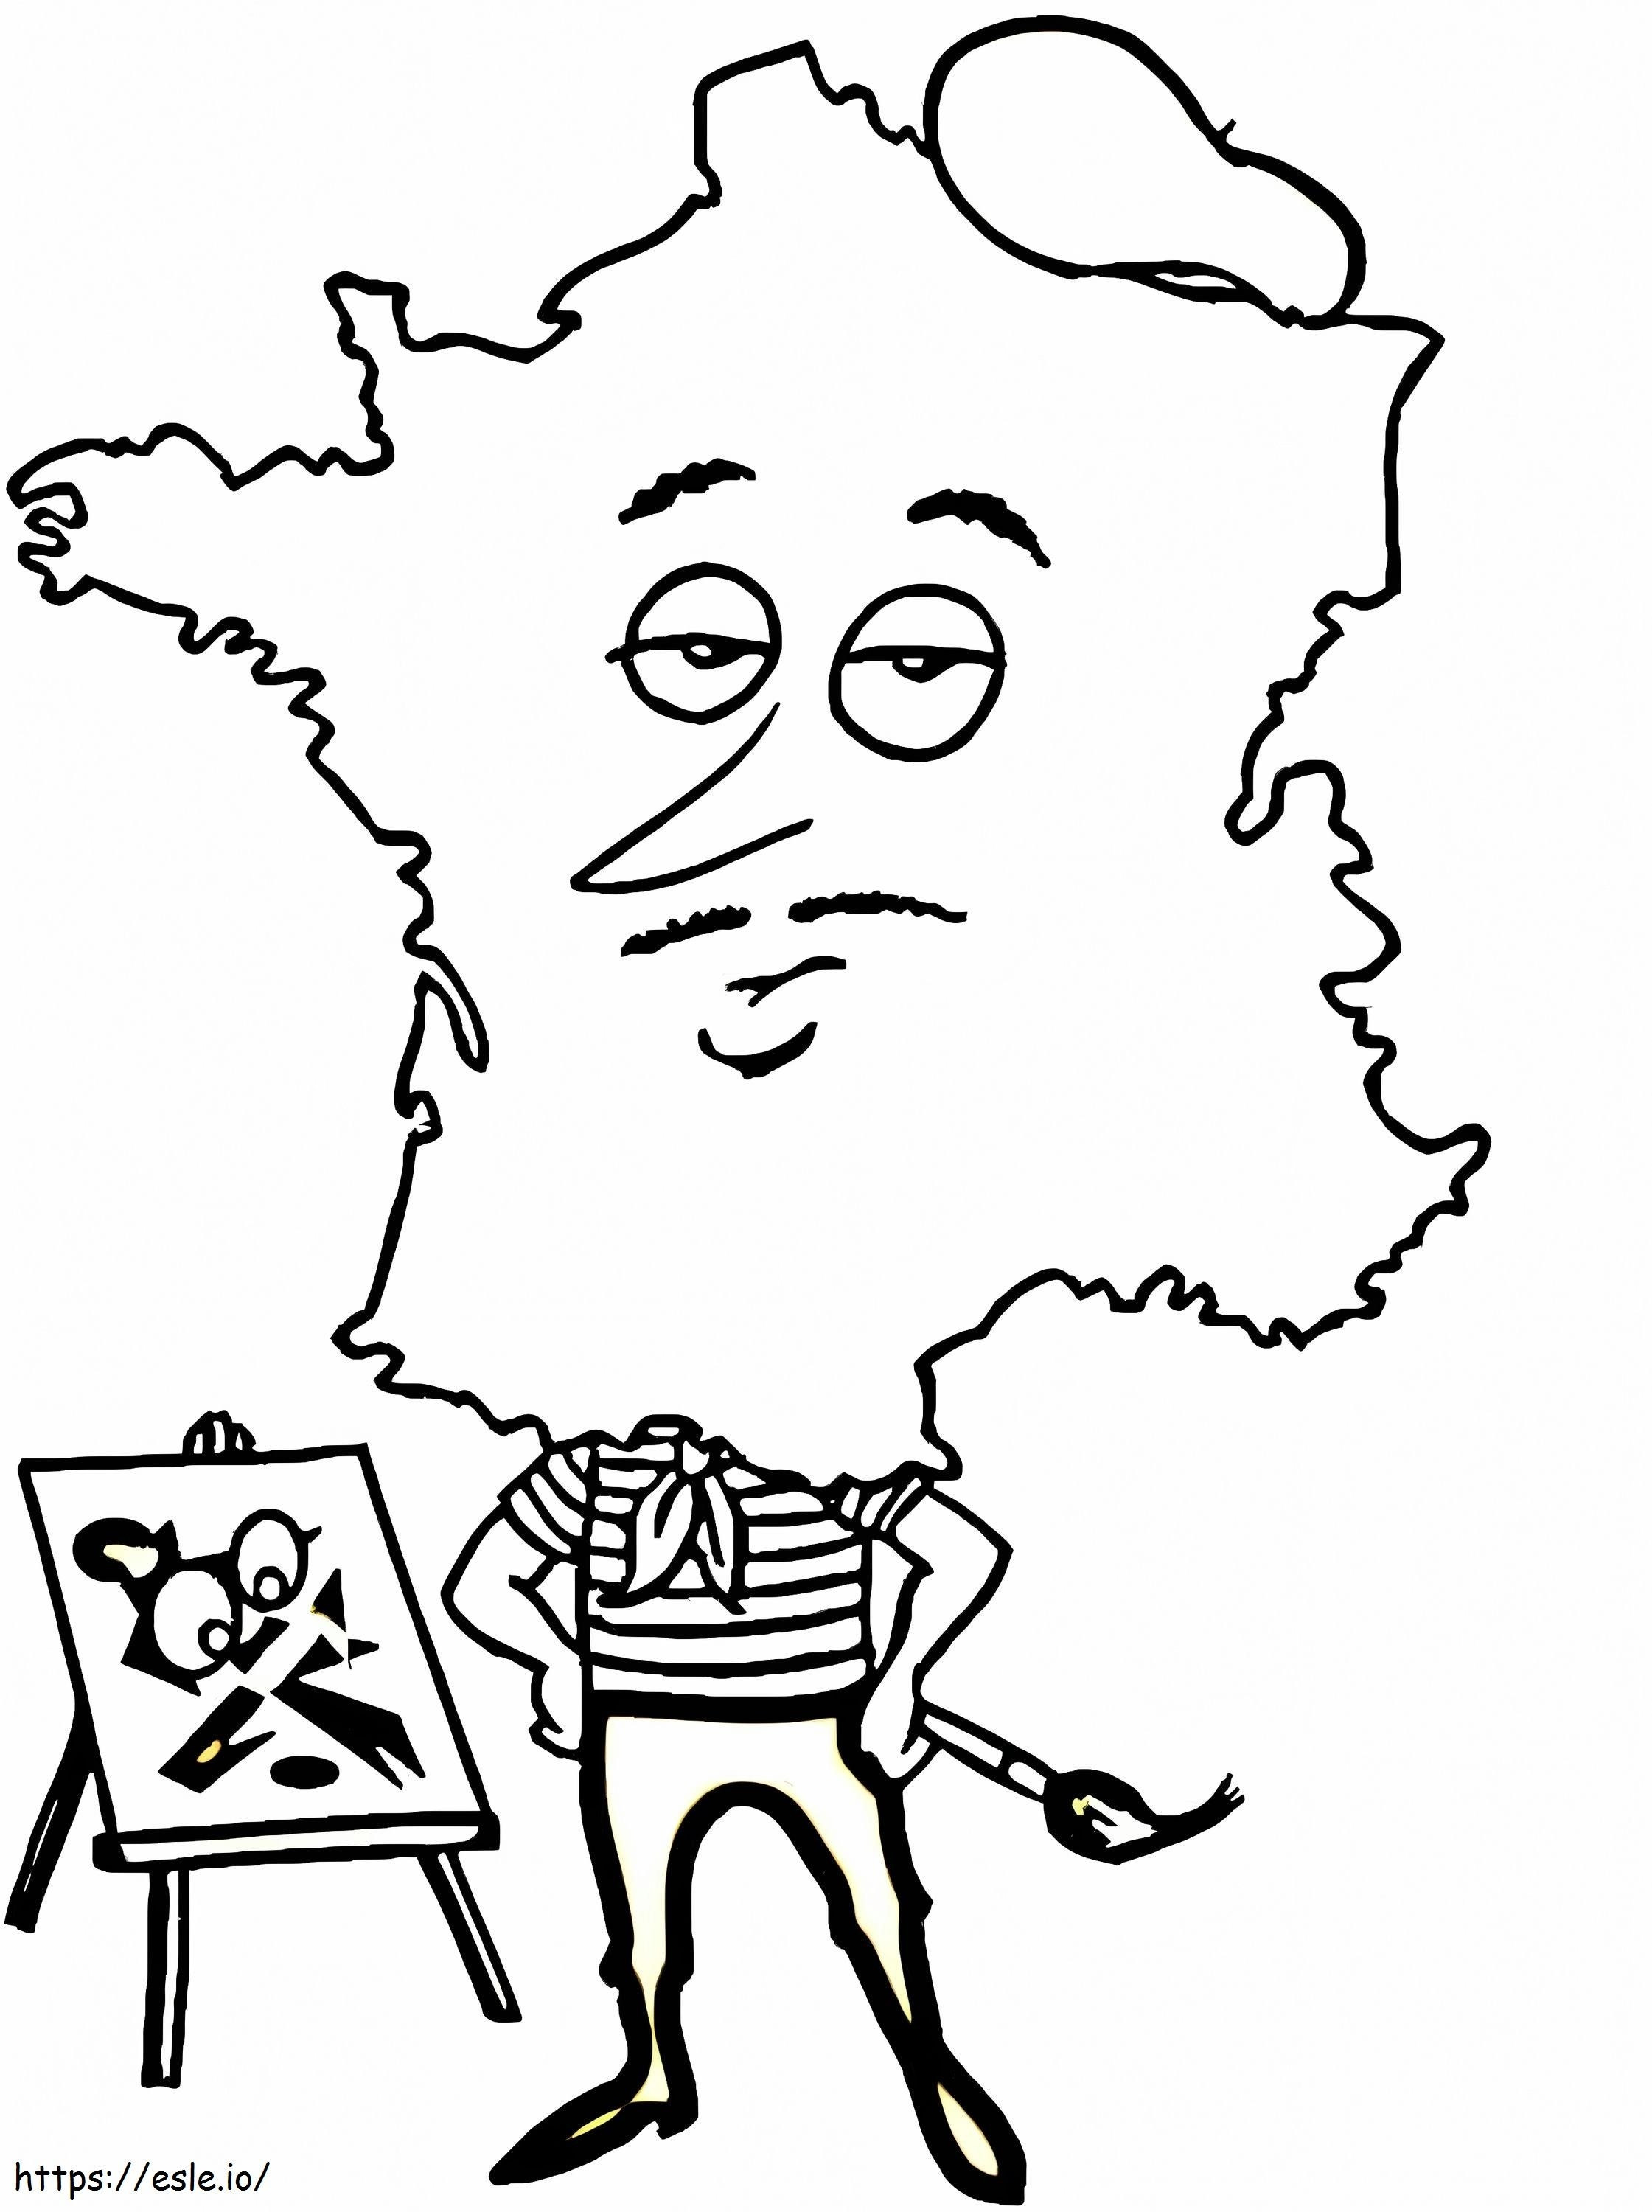 Painter Map Of France coloring page